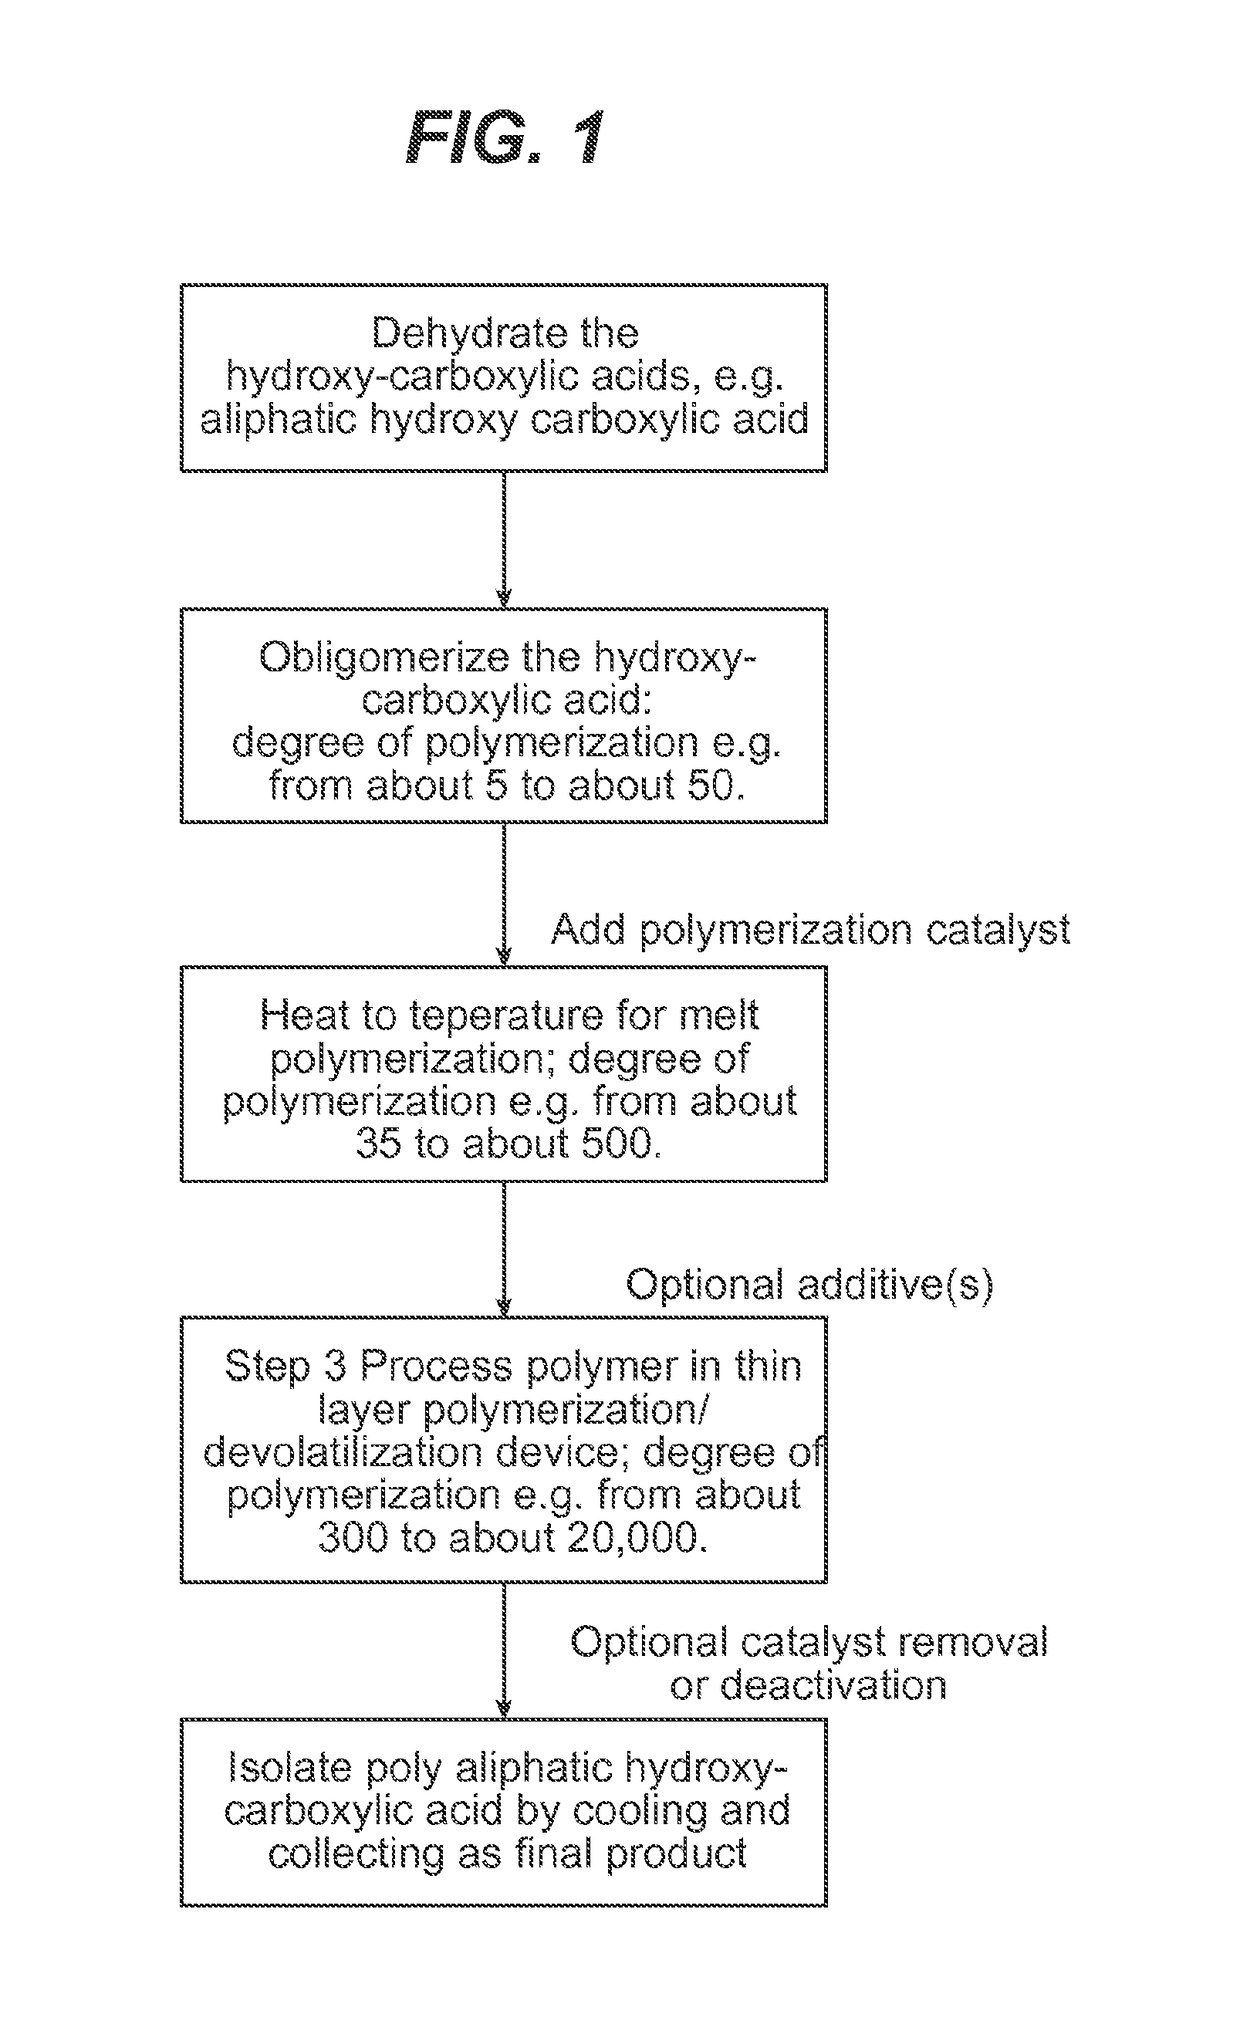 Processing hydroxy-carboxylic acids to polymers